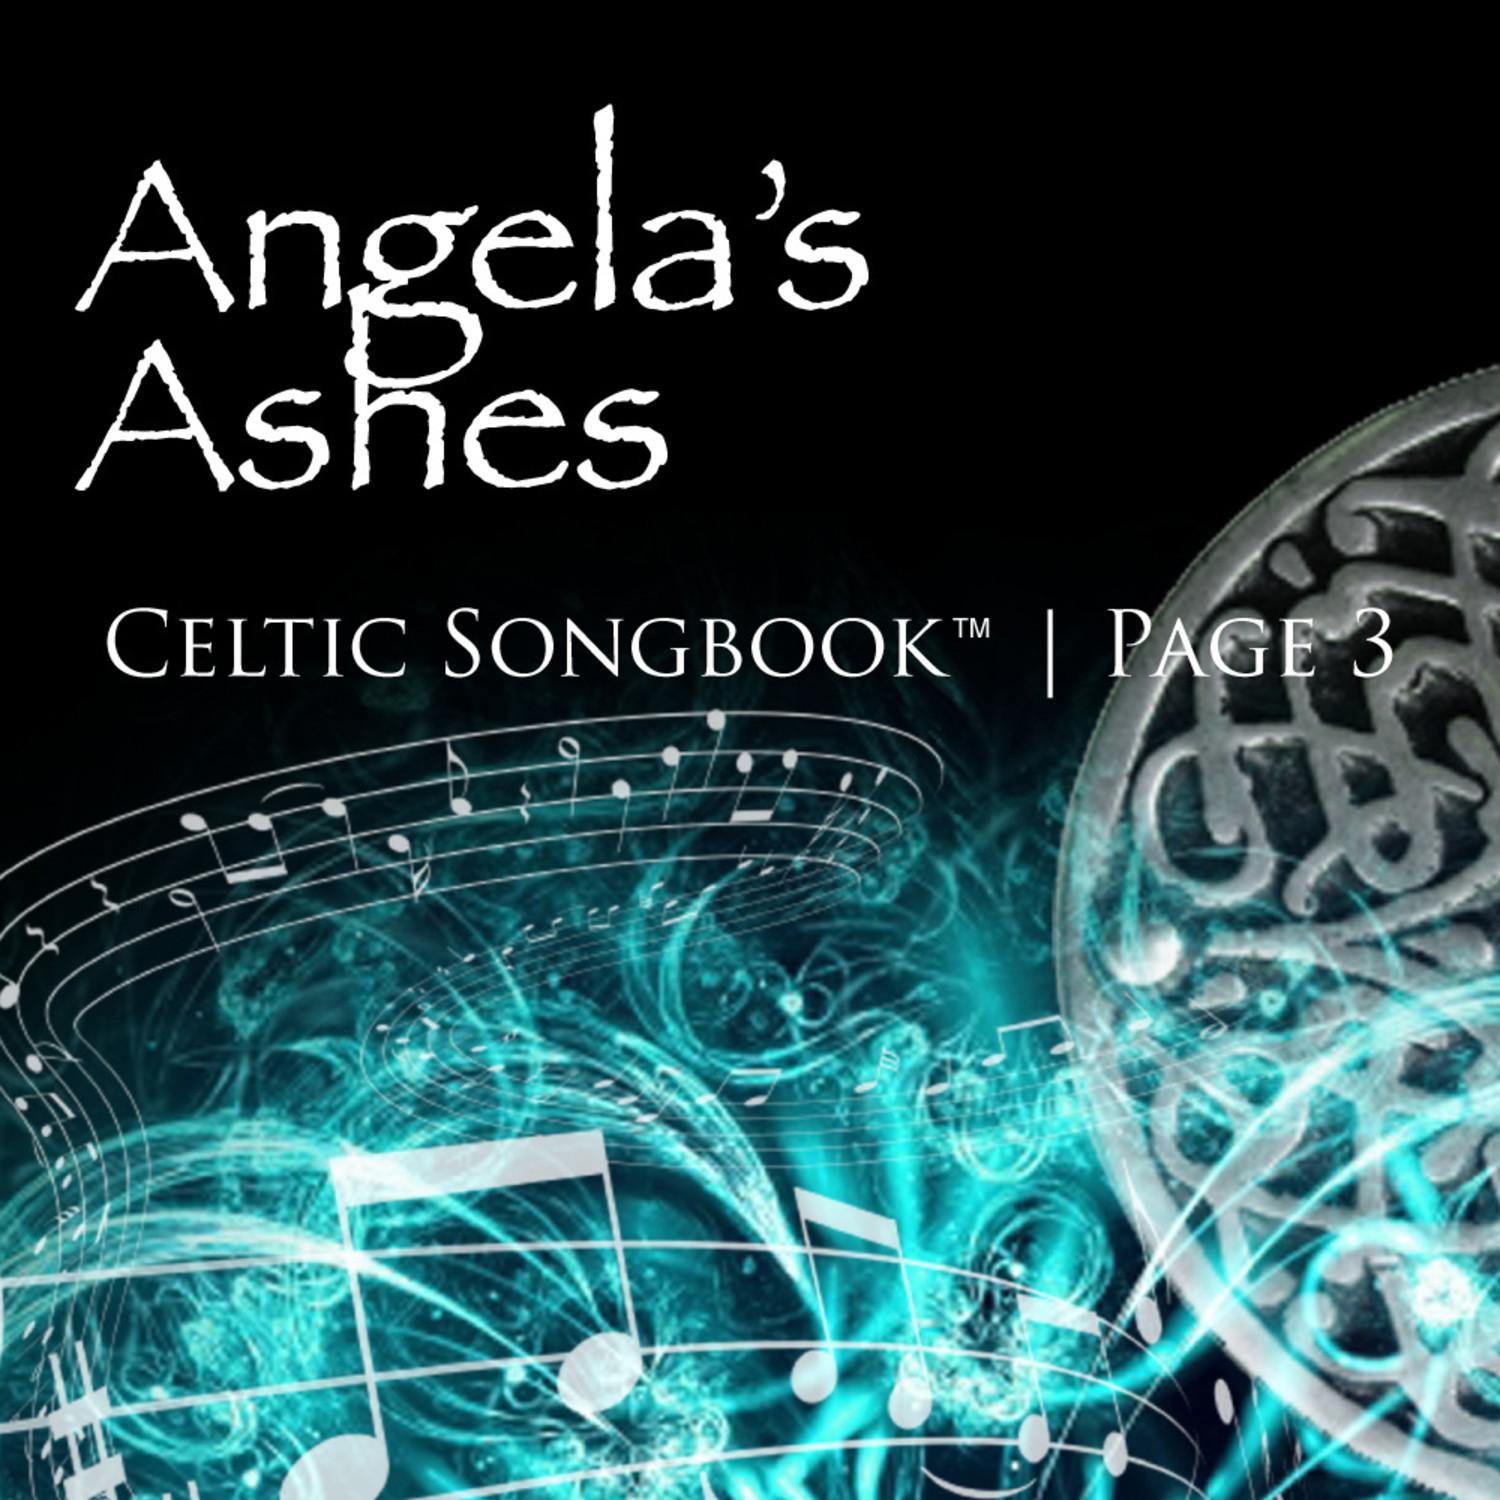 Angela's Ashes: Celtic Songbook Volume 3